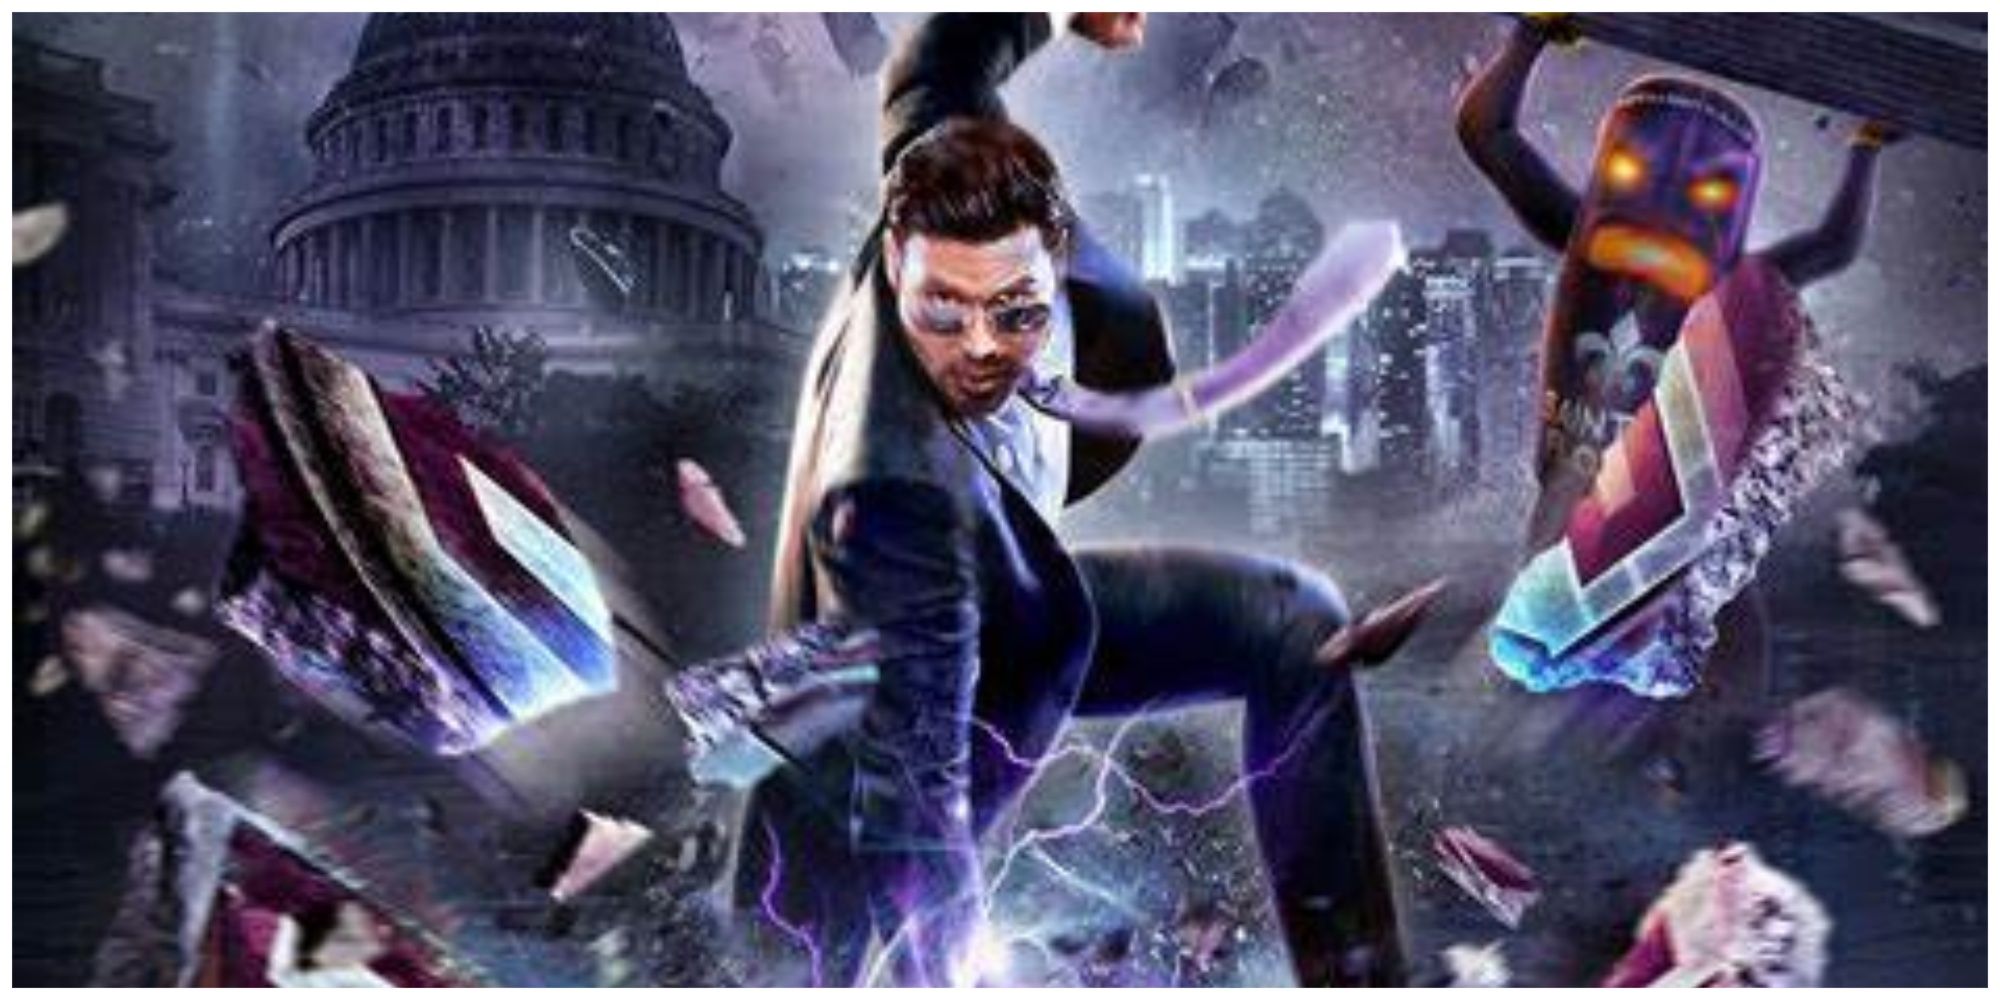 Saints Row 4 promo image of the Boss player character